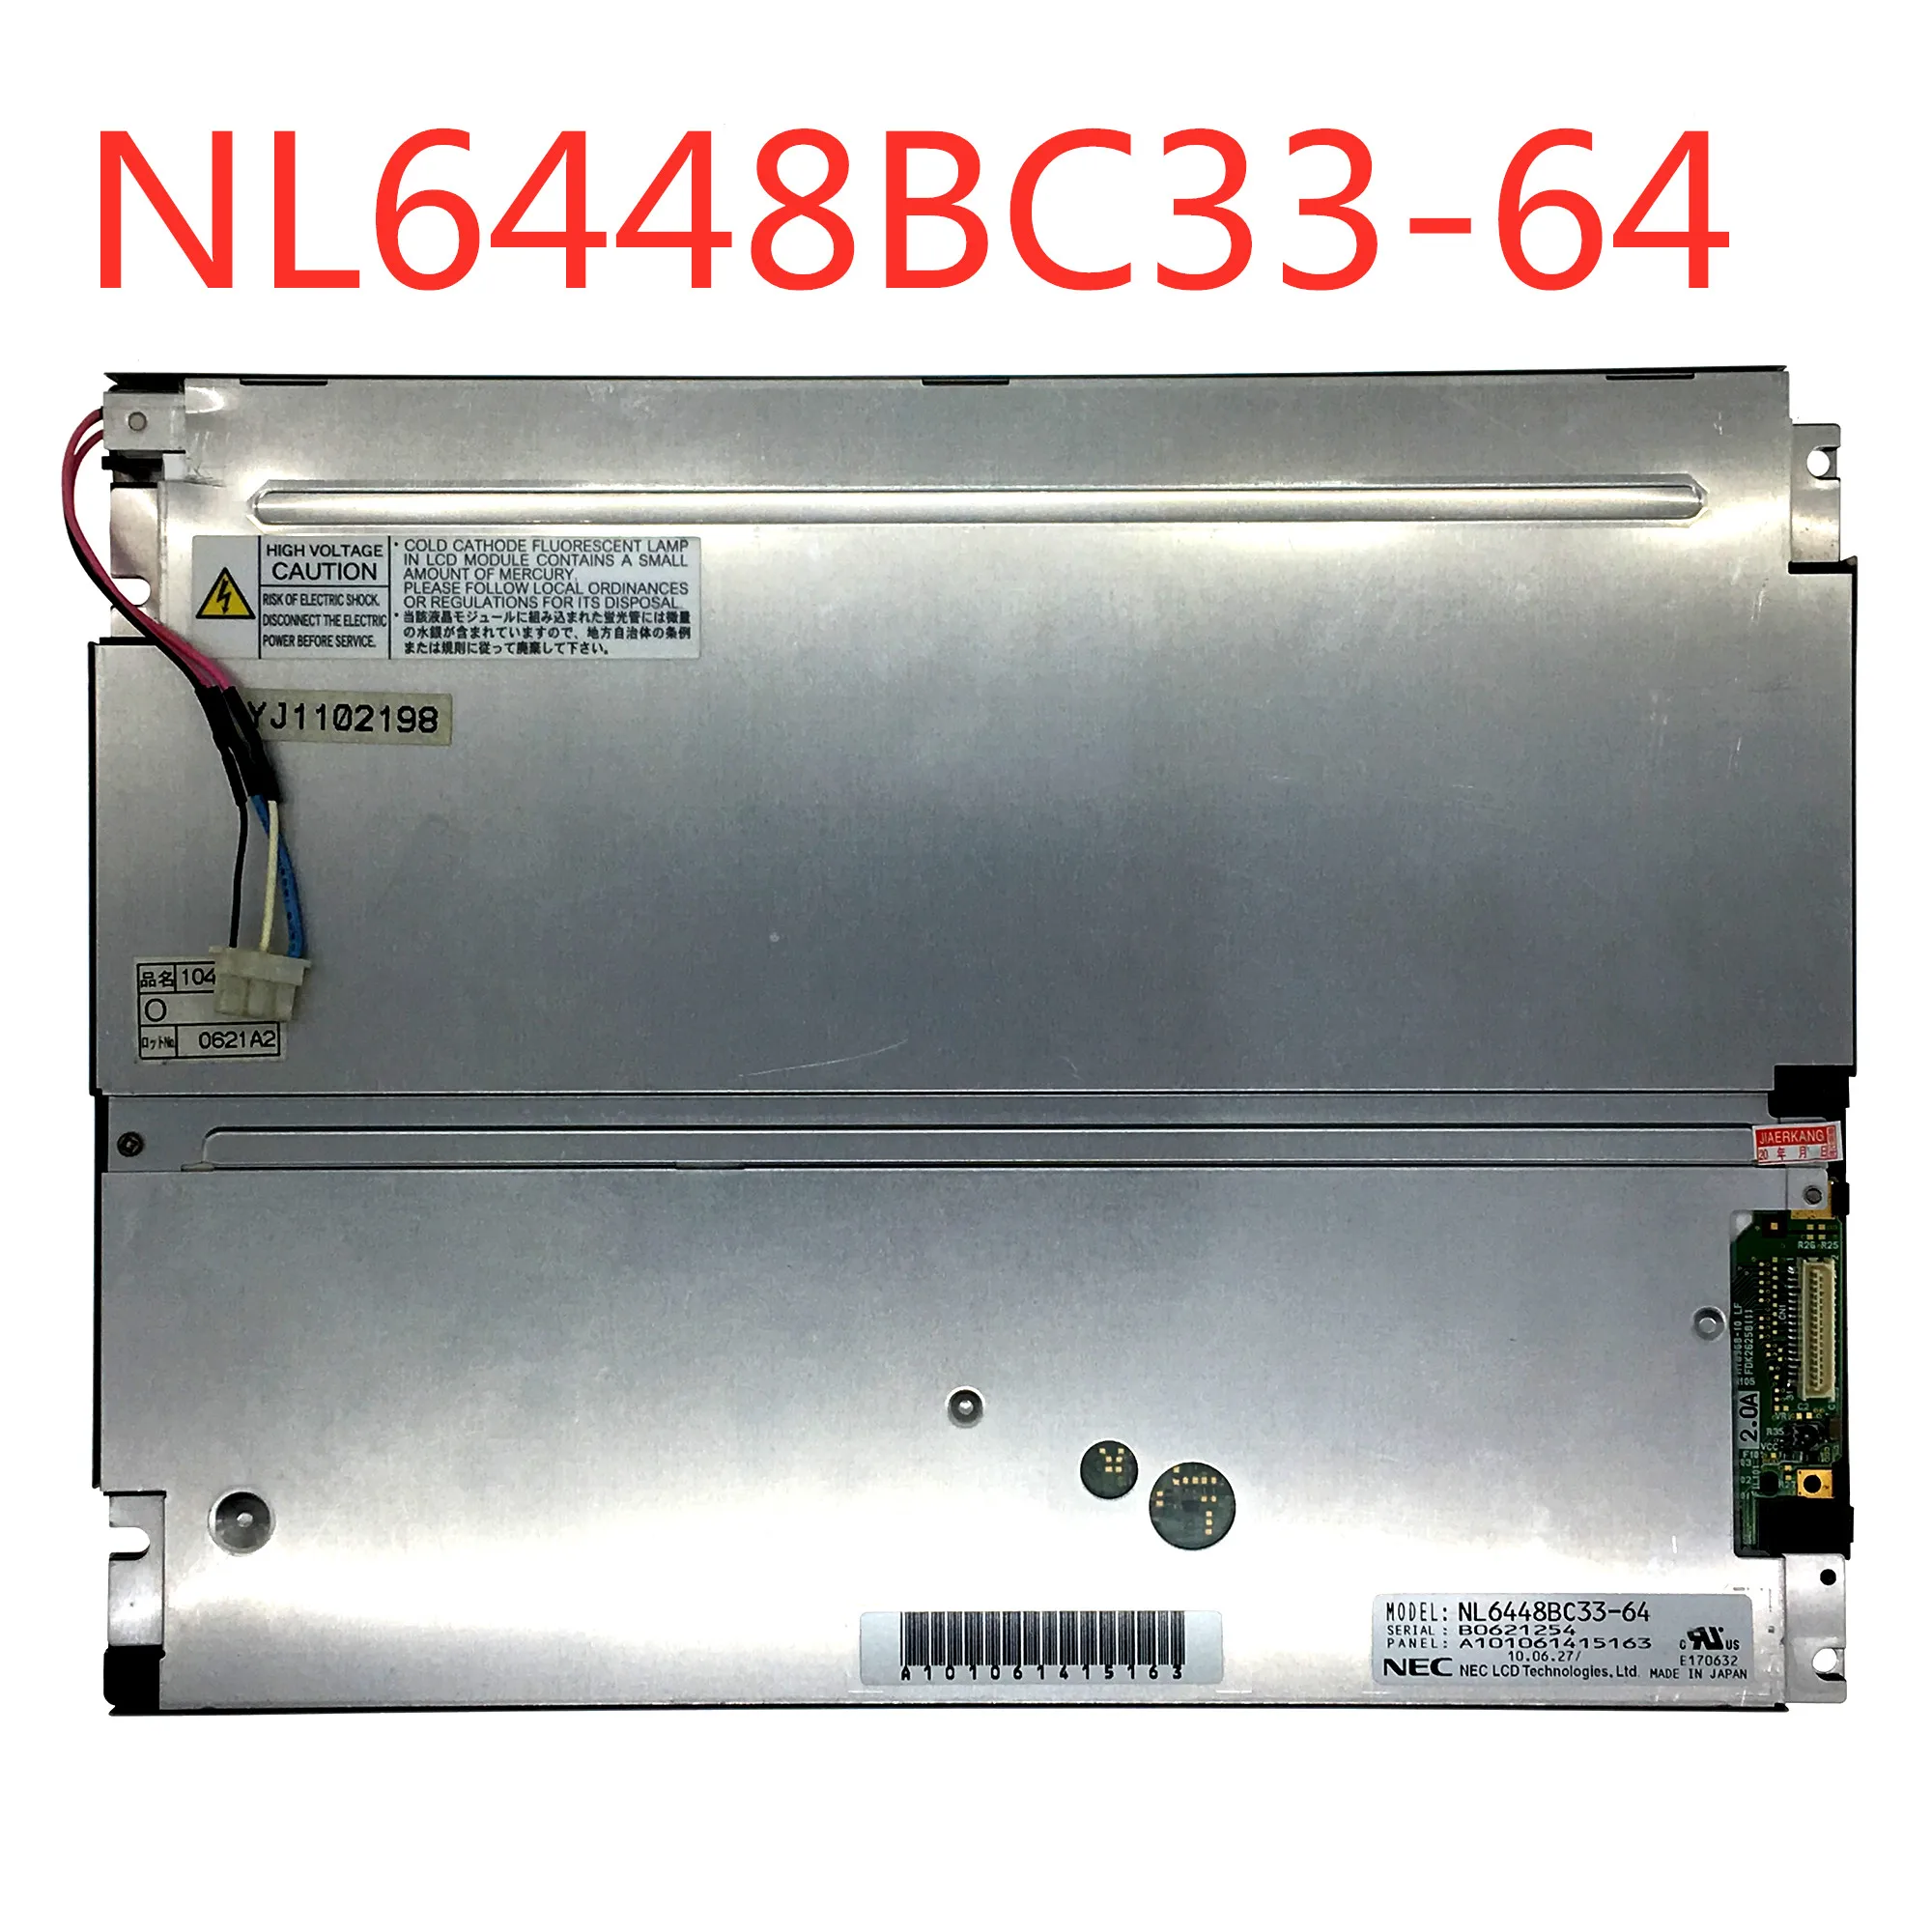 

Can provide test video , 90 days warranty 10.4"640*480 a-Si TFT-LCD panel NL6448BC33-64